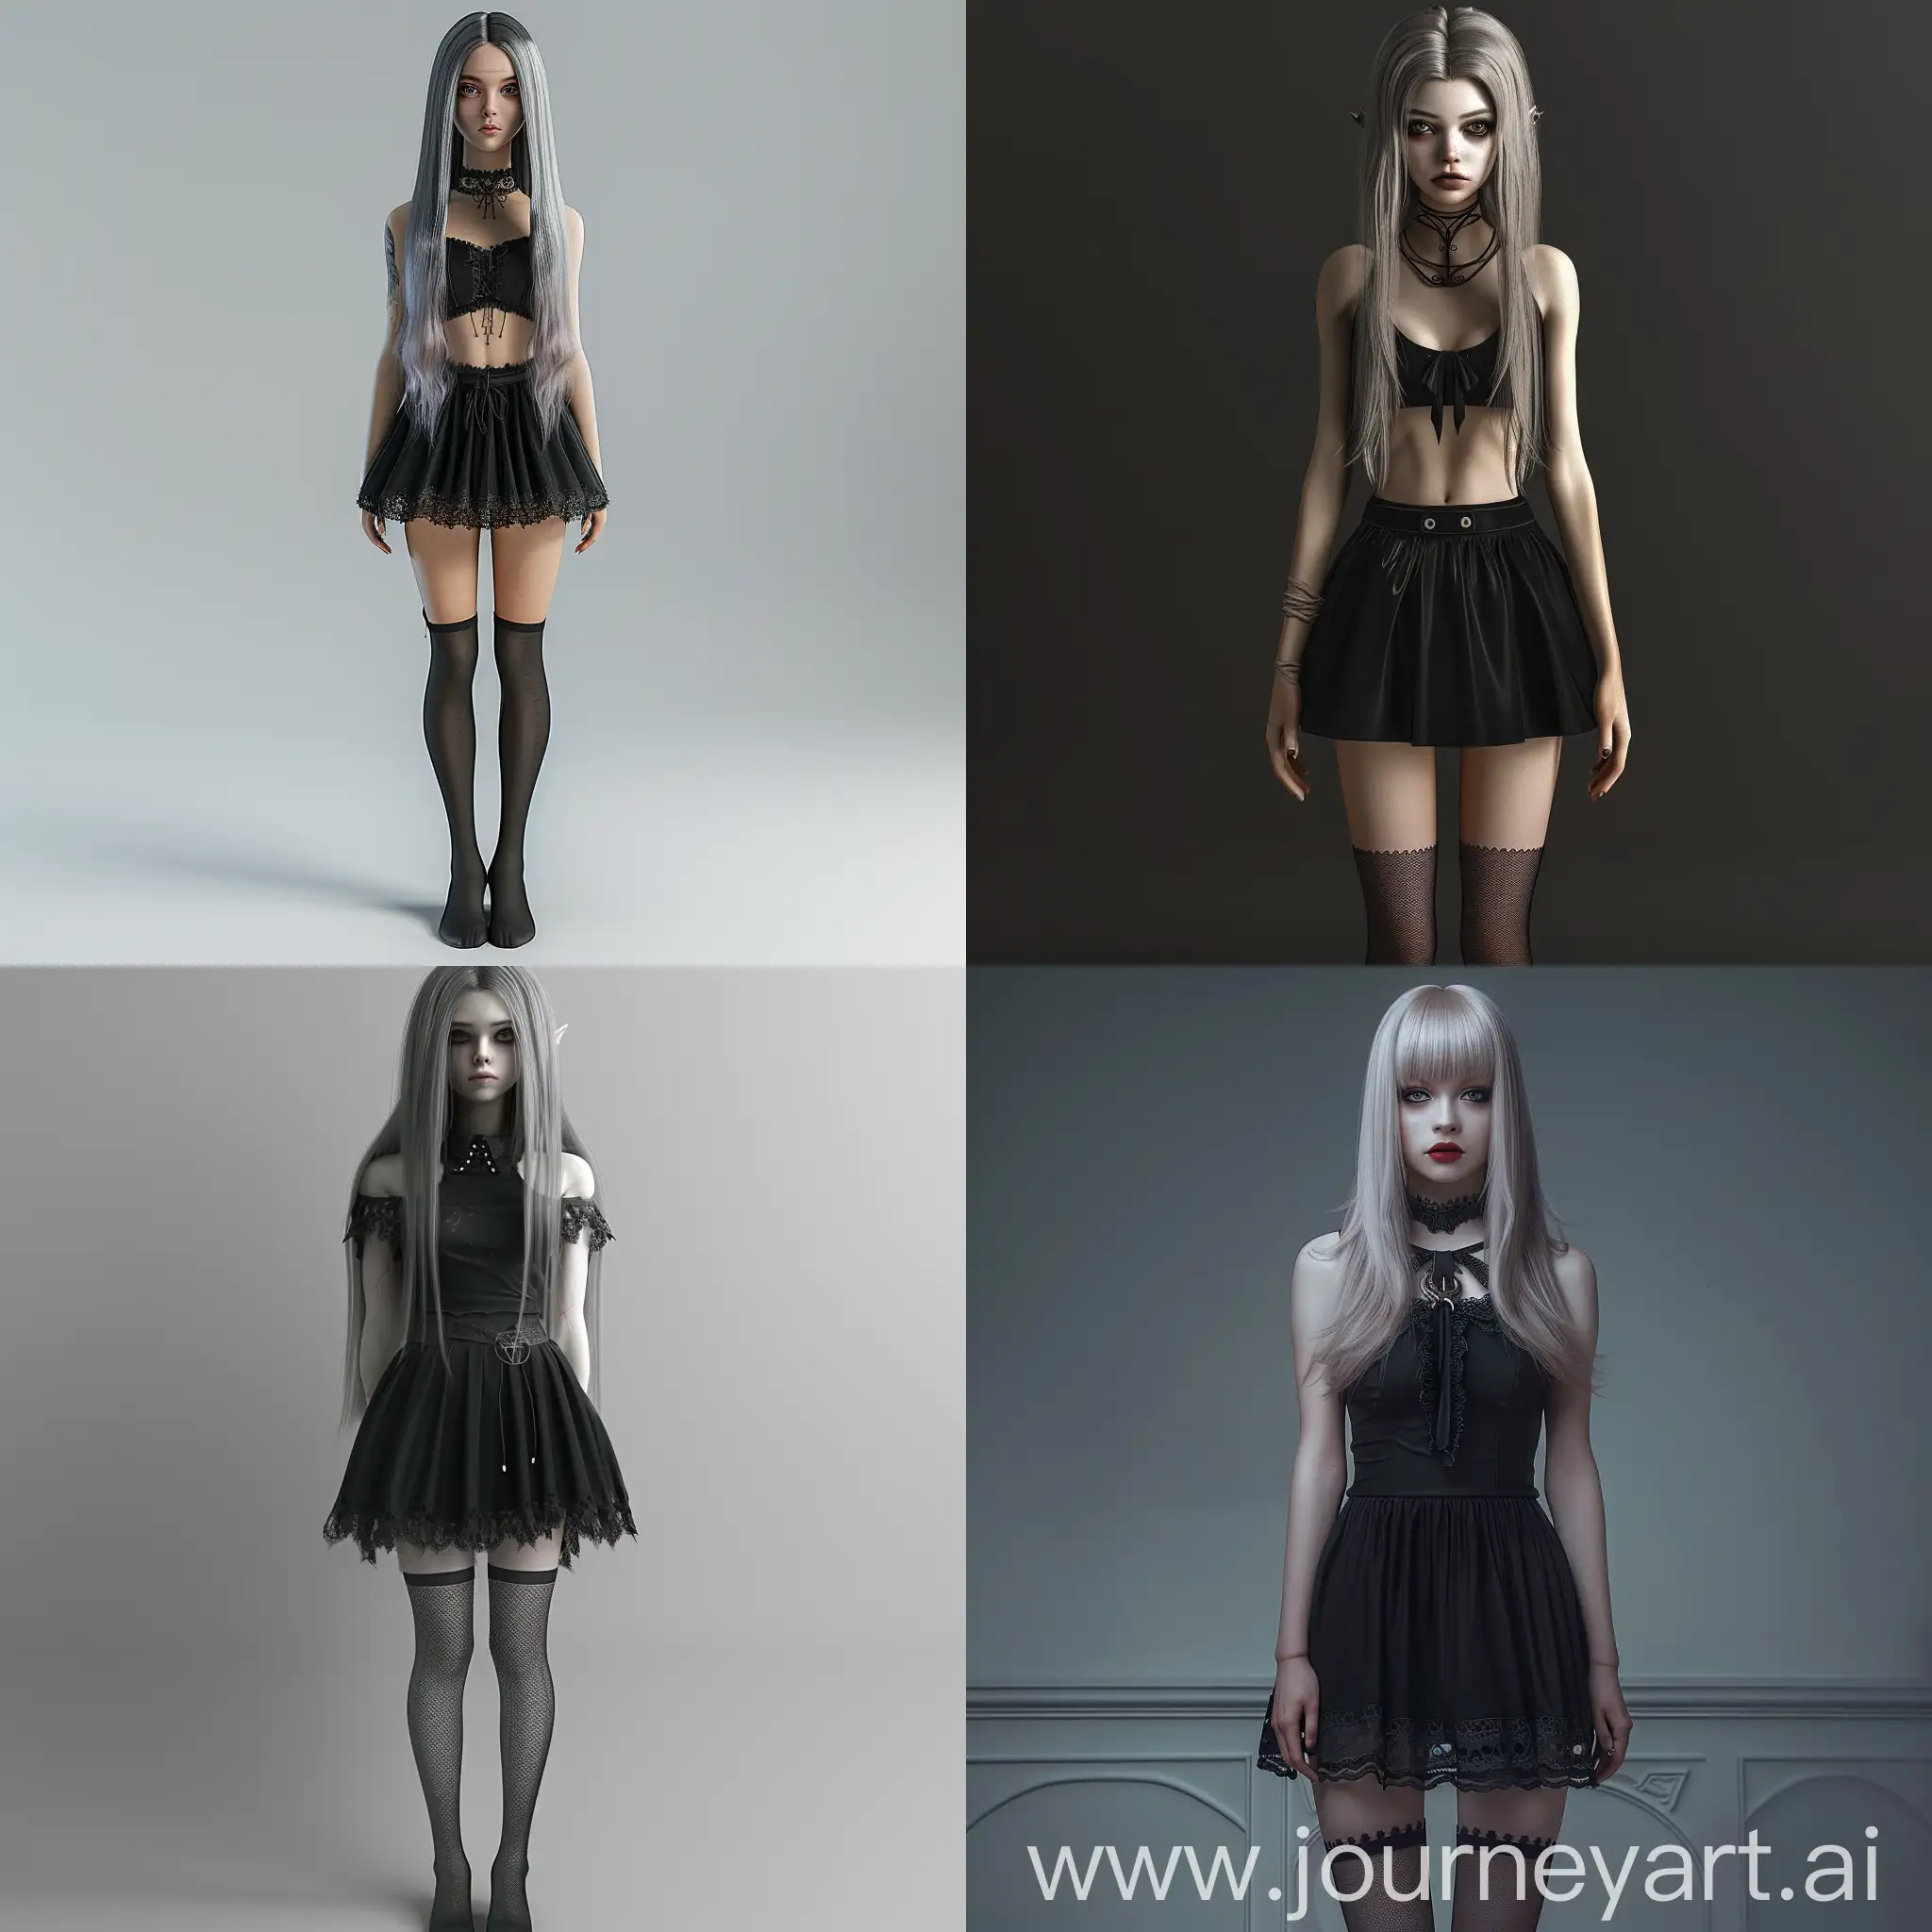 photorealistic goth girl with straight hair, black skirt and stockings